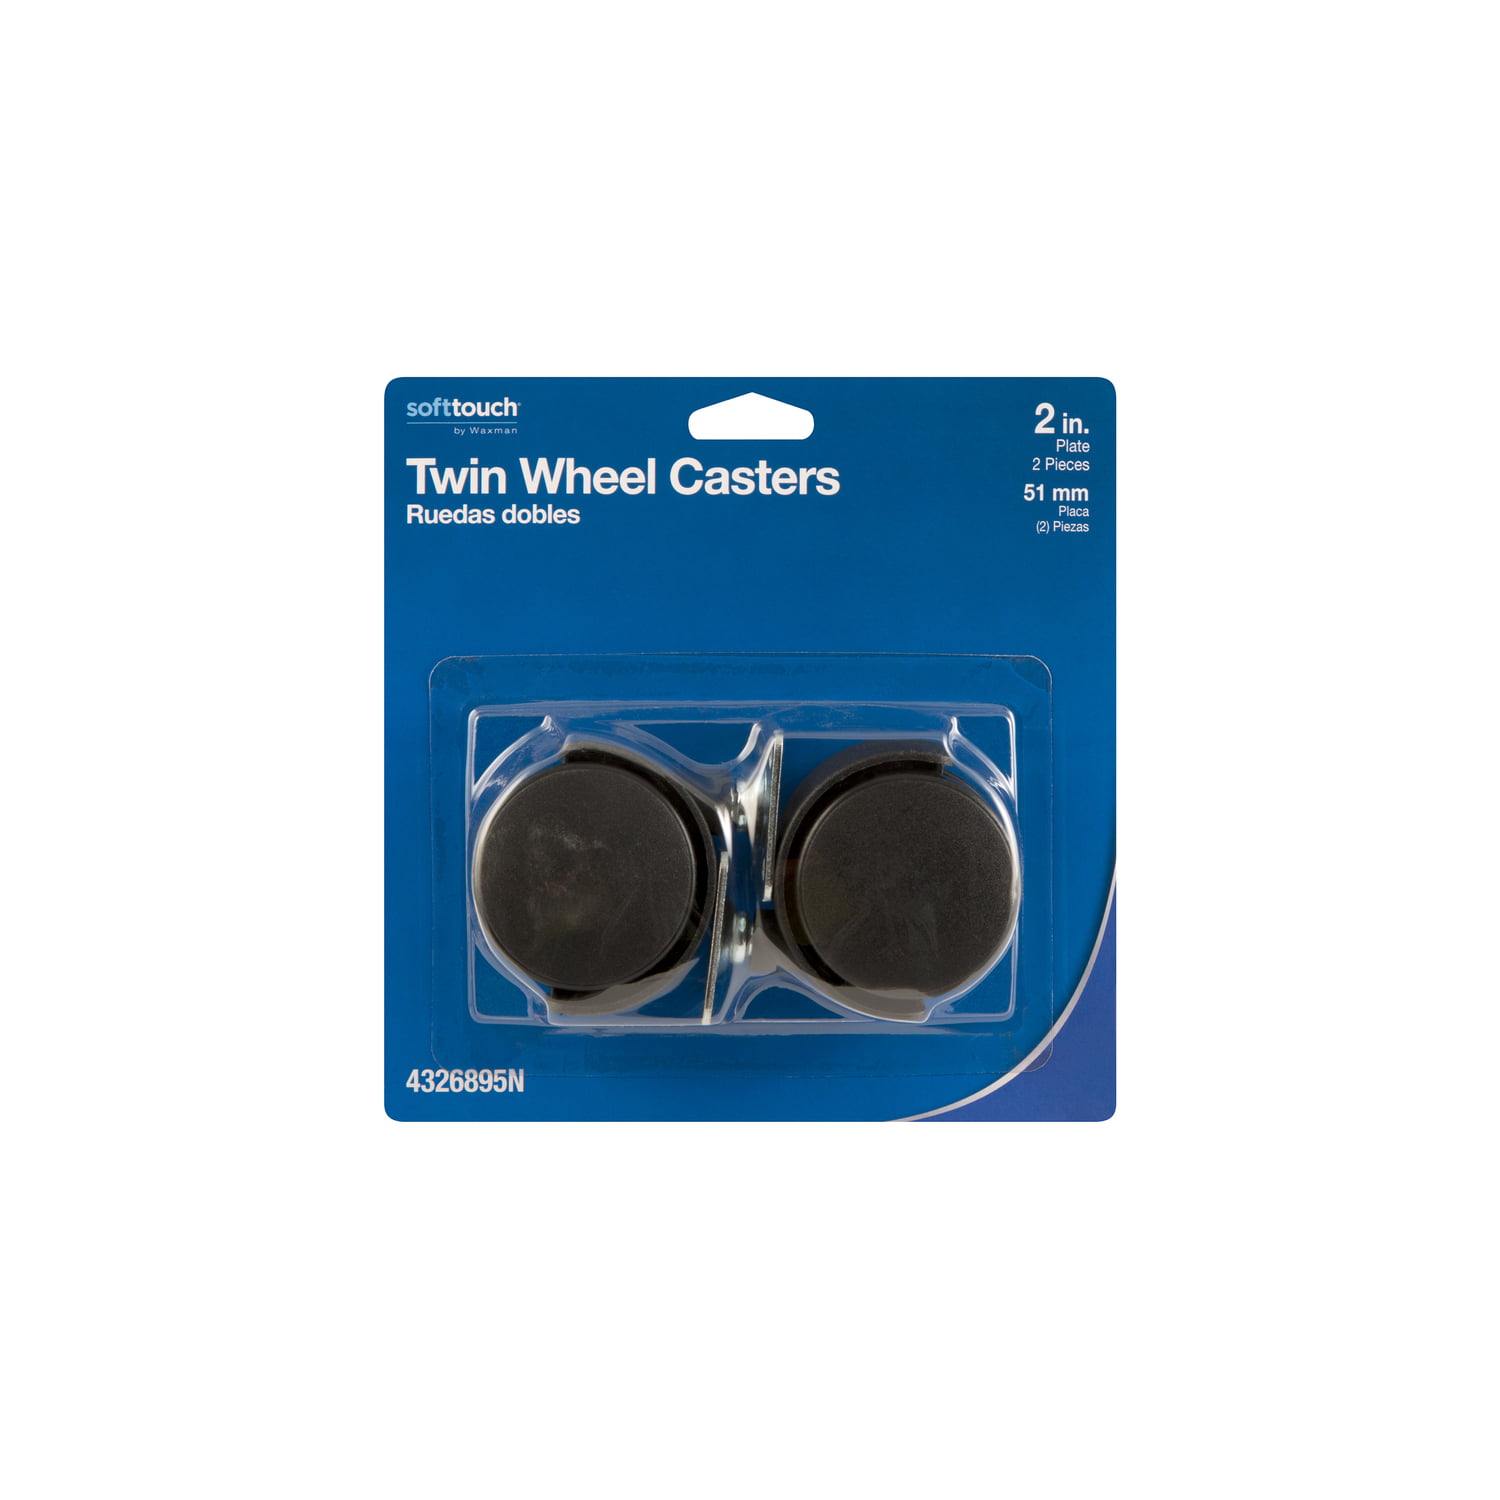 2 PACK SOFT TOUCH 2" TWIN WHEEL CASTERS #0449536 FOR CHAIRS DESKS CARTS Waxman 